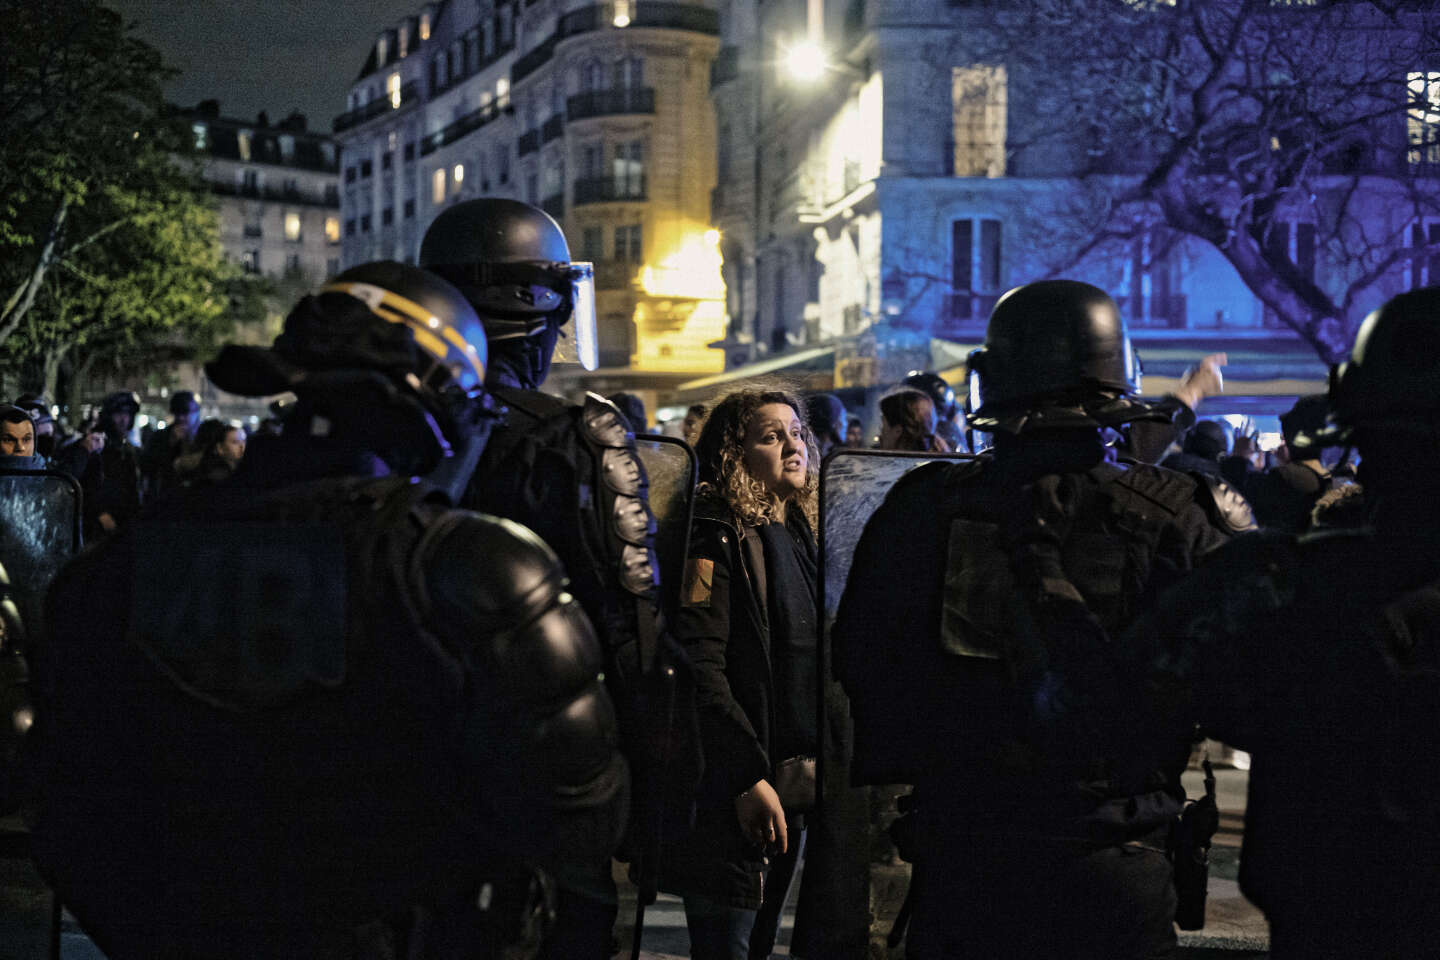 After the demonstrations in Paris, lawyers file a hundred complaints for “arbitrary deprivation of liberty” and “obstructing the freedom to demonstrate”